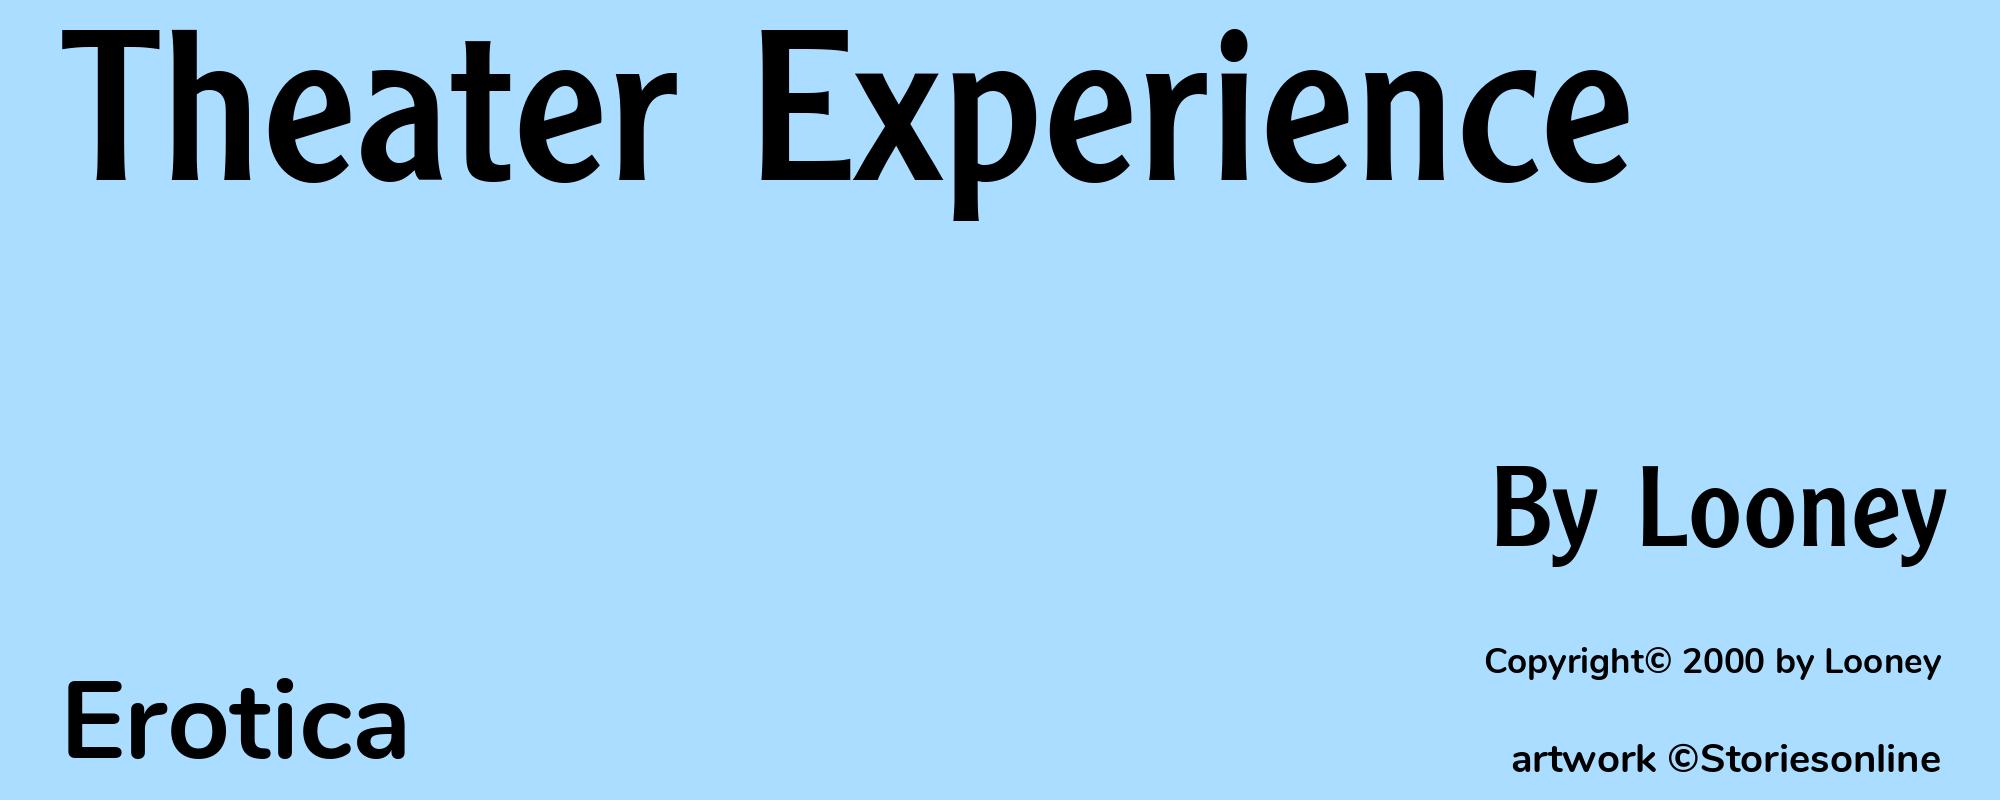 Theater Experience - Cover